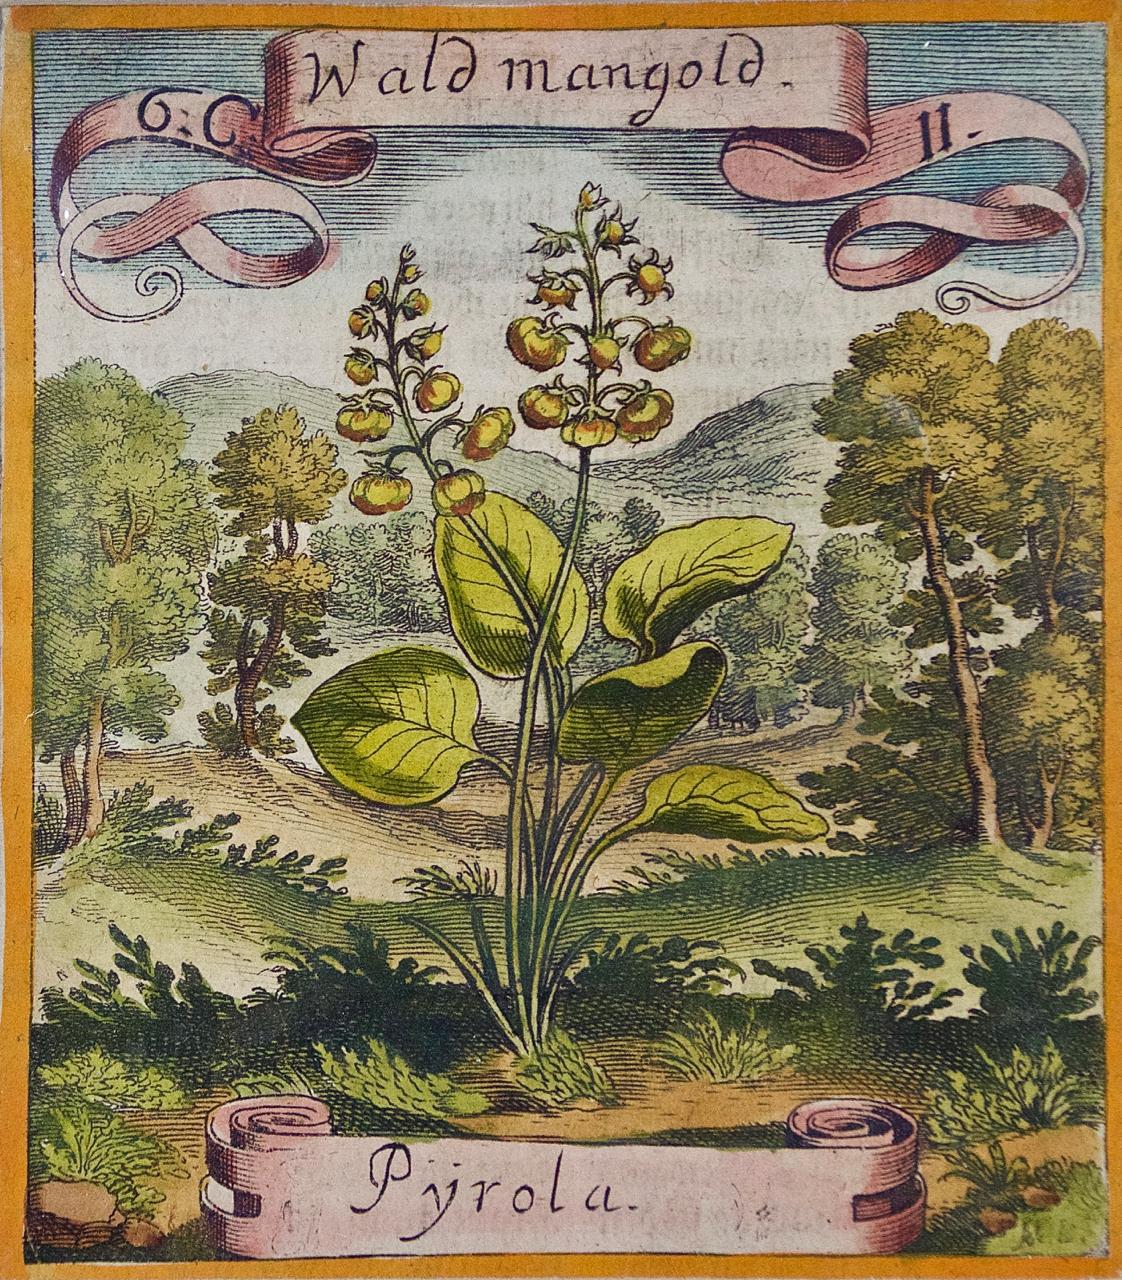 17th Century Hand-colored Botanical Engraving of a Wintergreen Plant by Merian  - Print by Matthaeus Merian